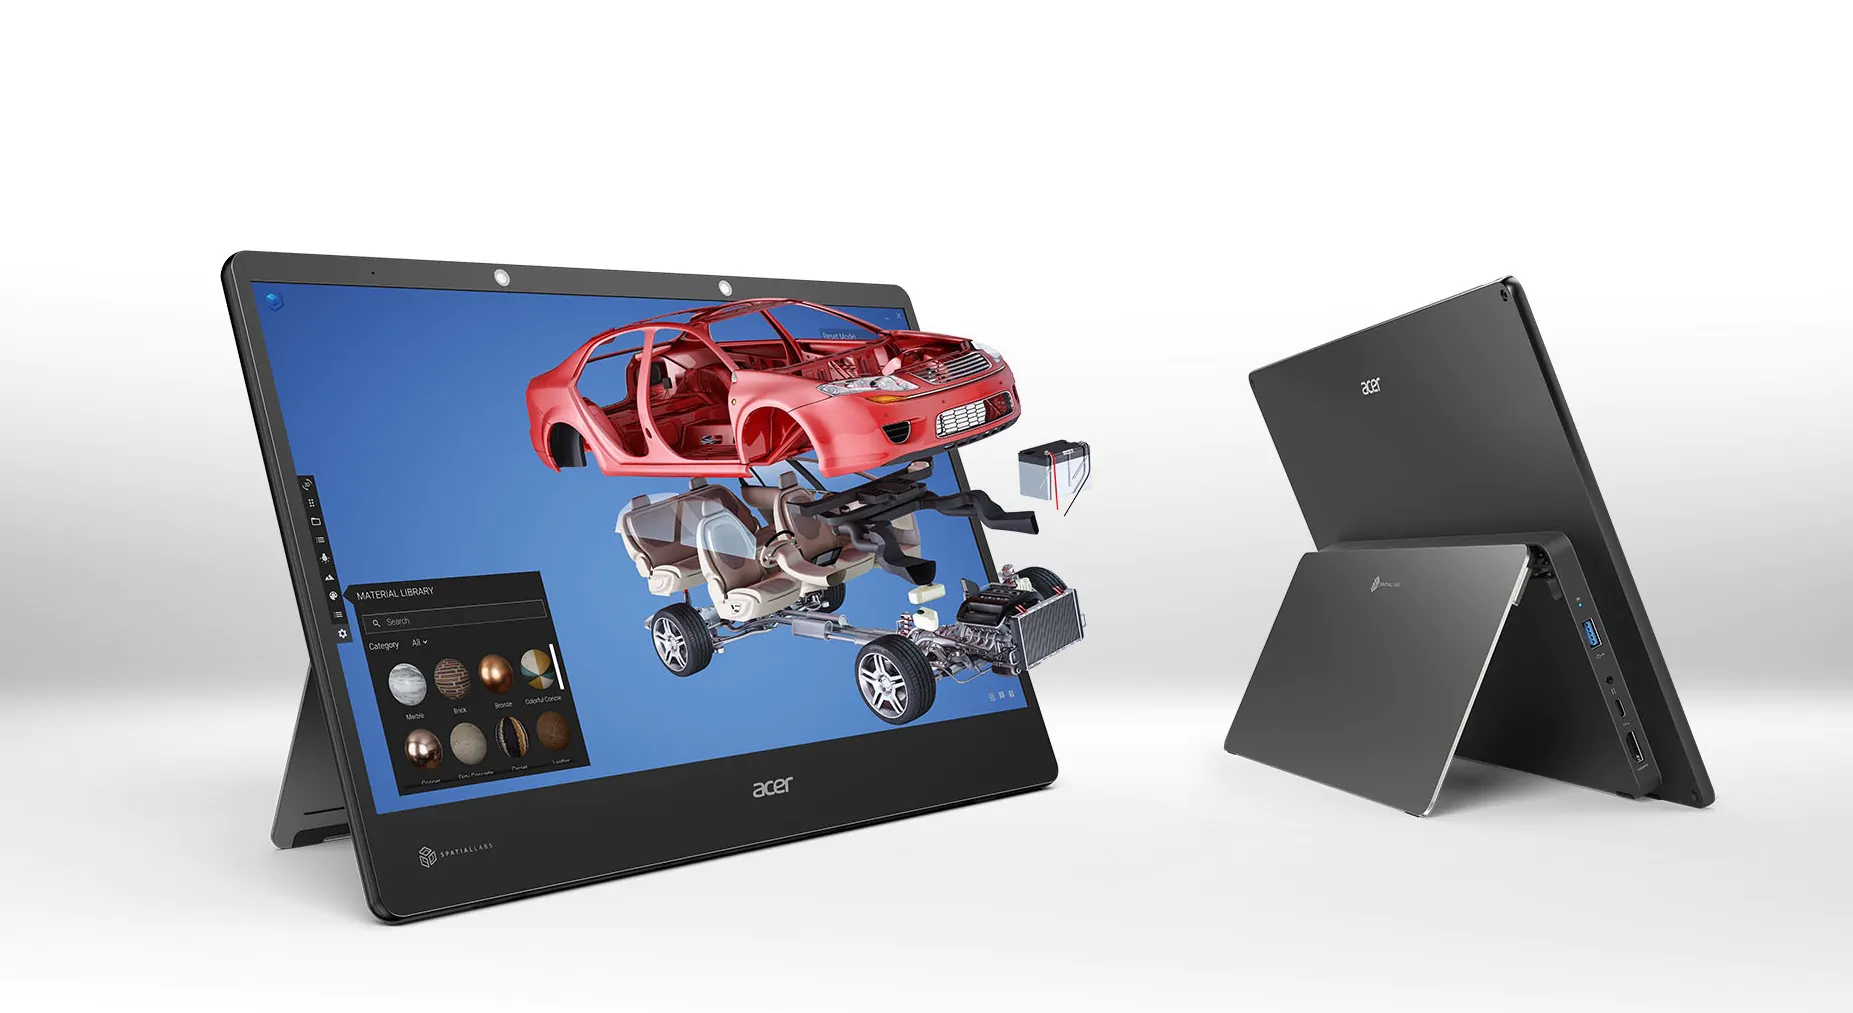 Acer: expands stereoscopic 3D product offering